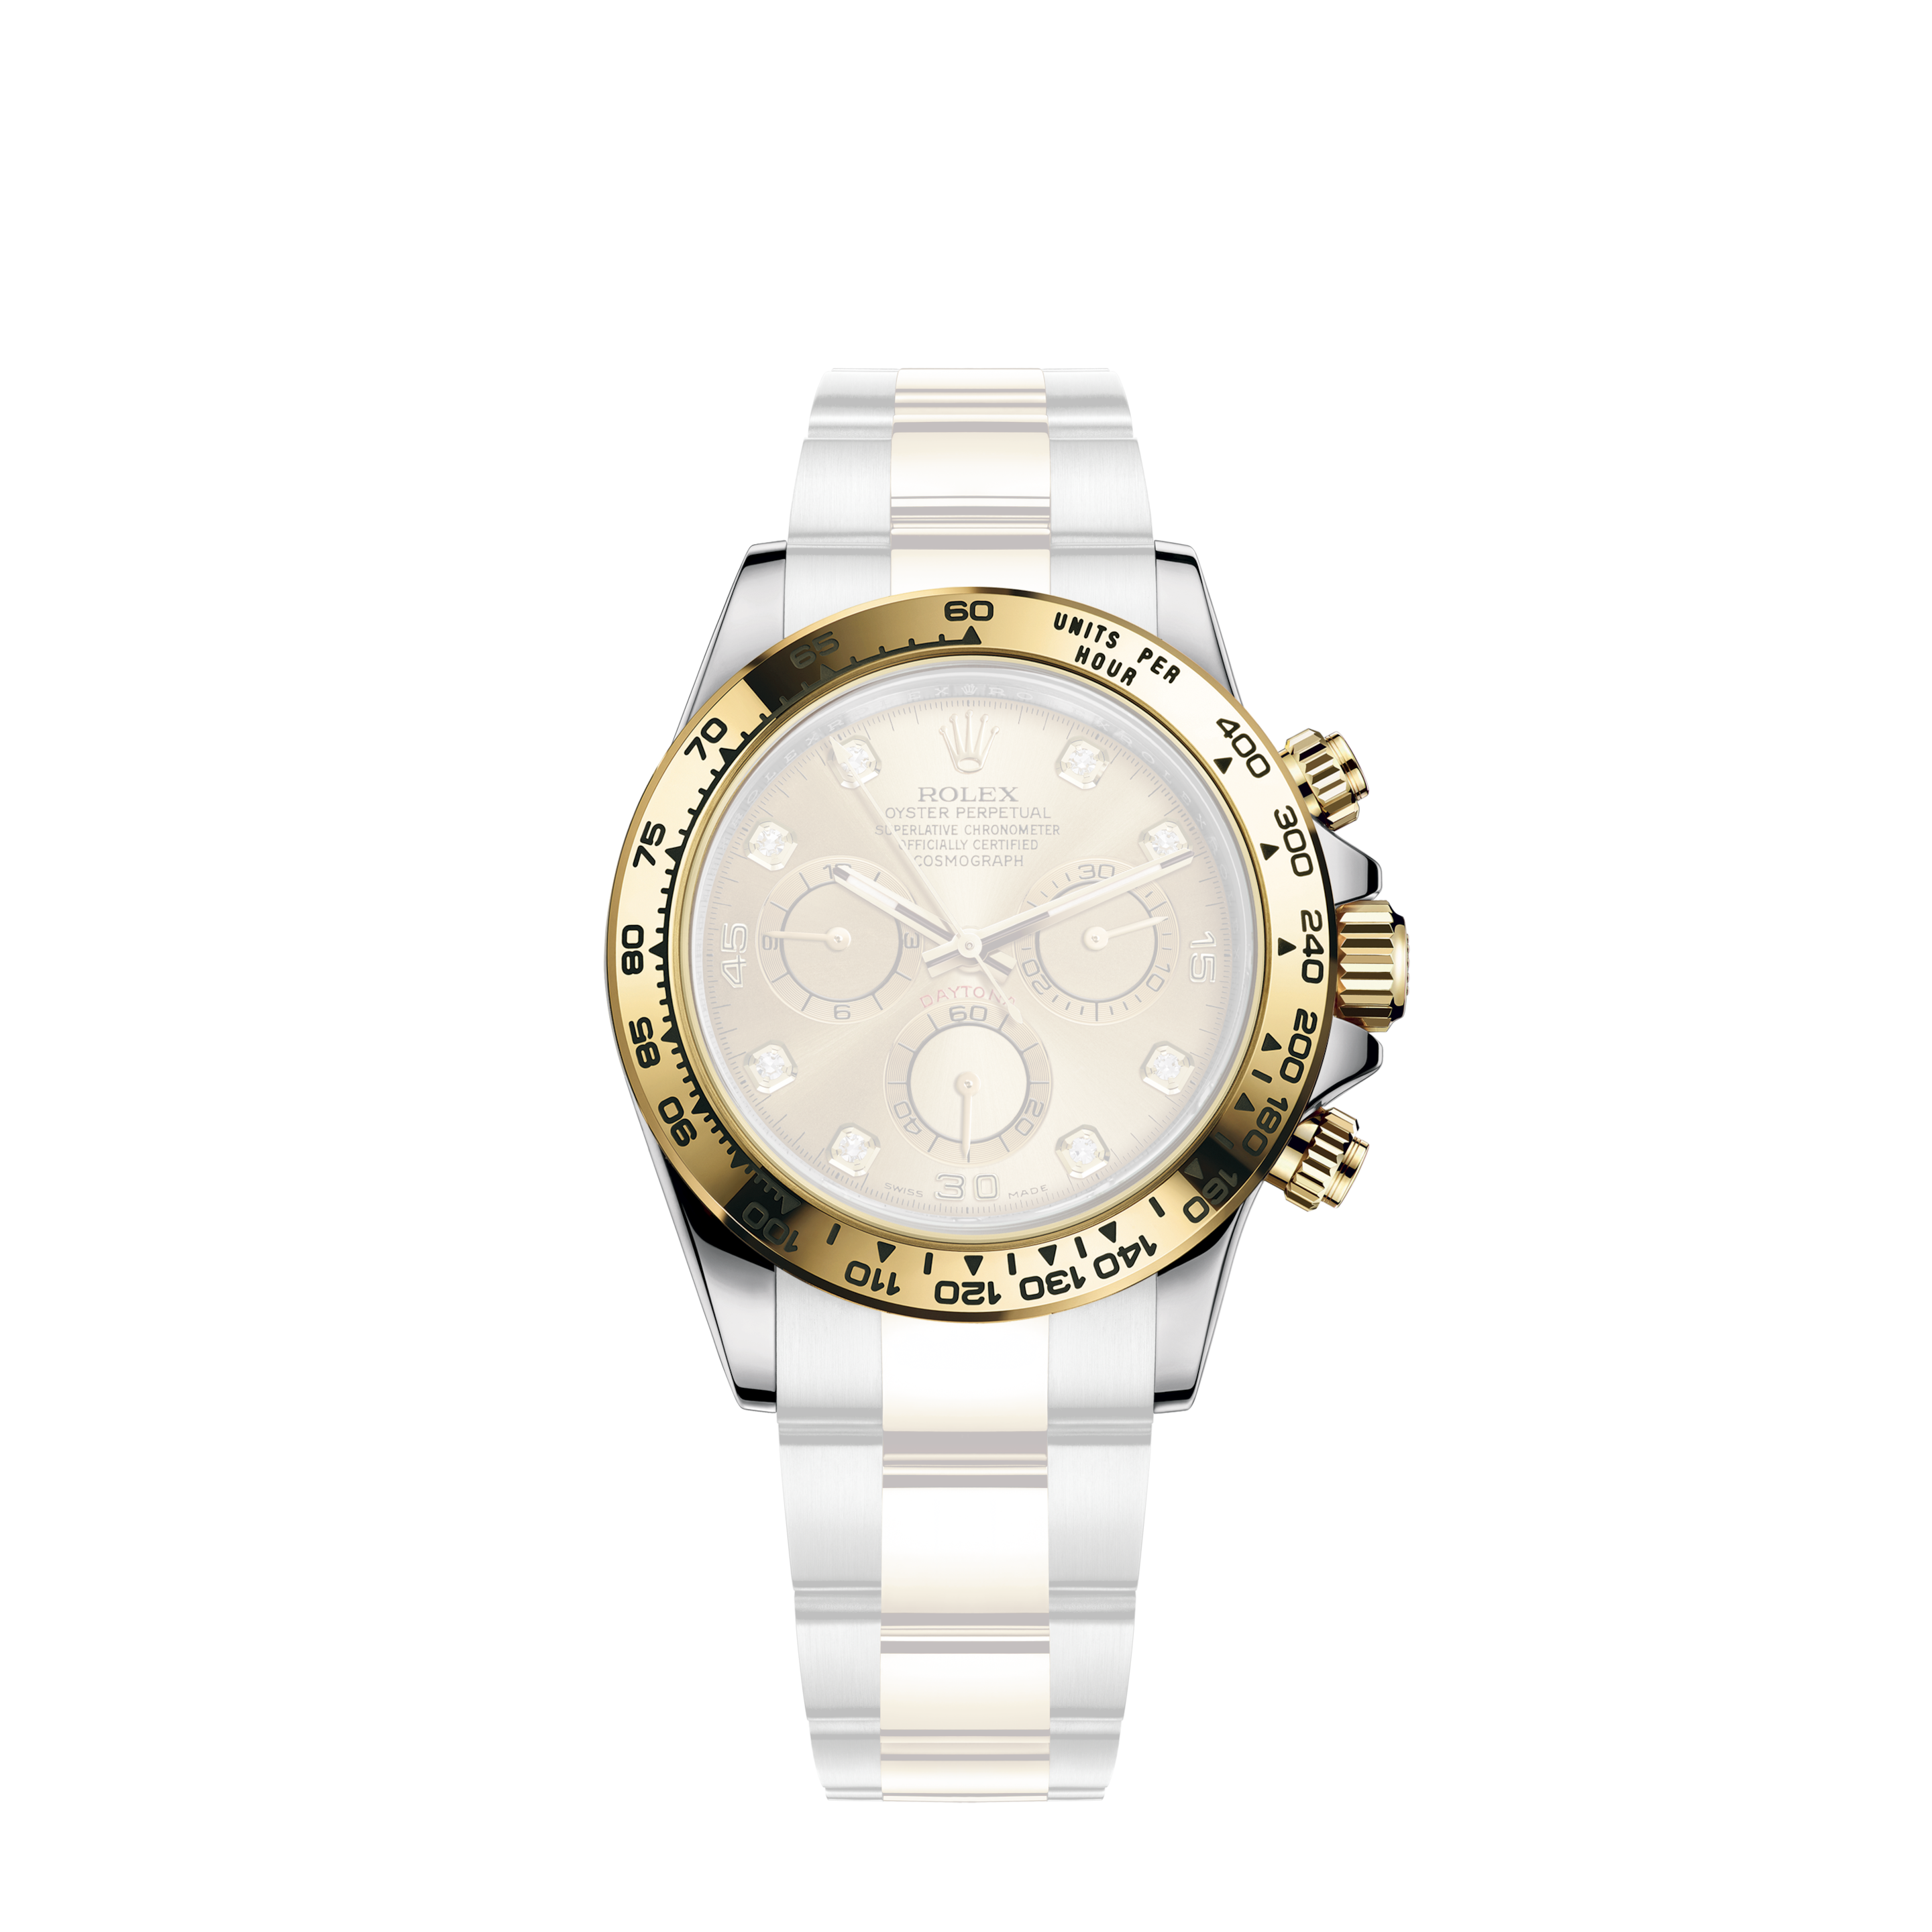 Rolex Datejust 36mm - Steel and Gold Yellow Gold - Diamond Bezel - Oyster 126283RBR SDR69O